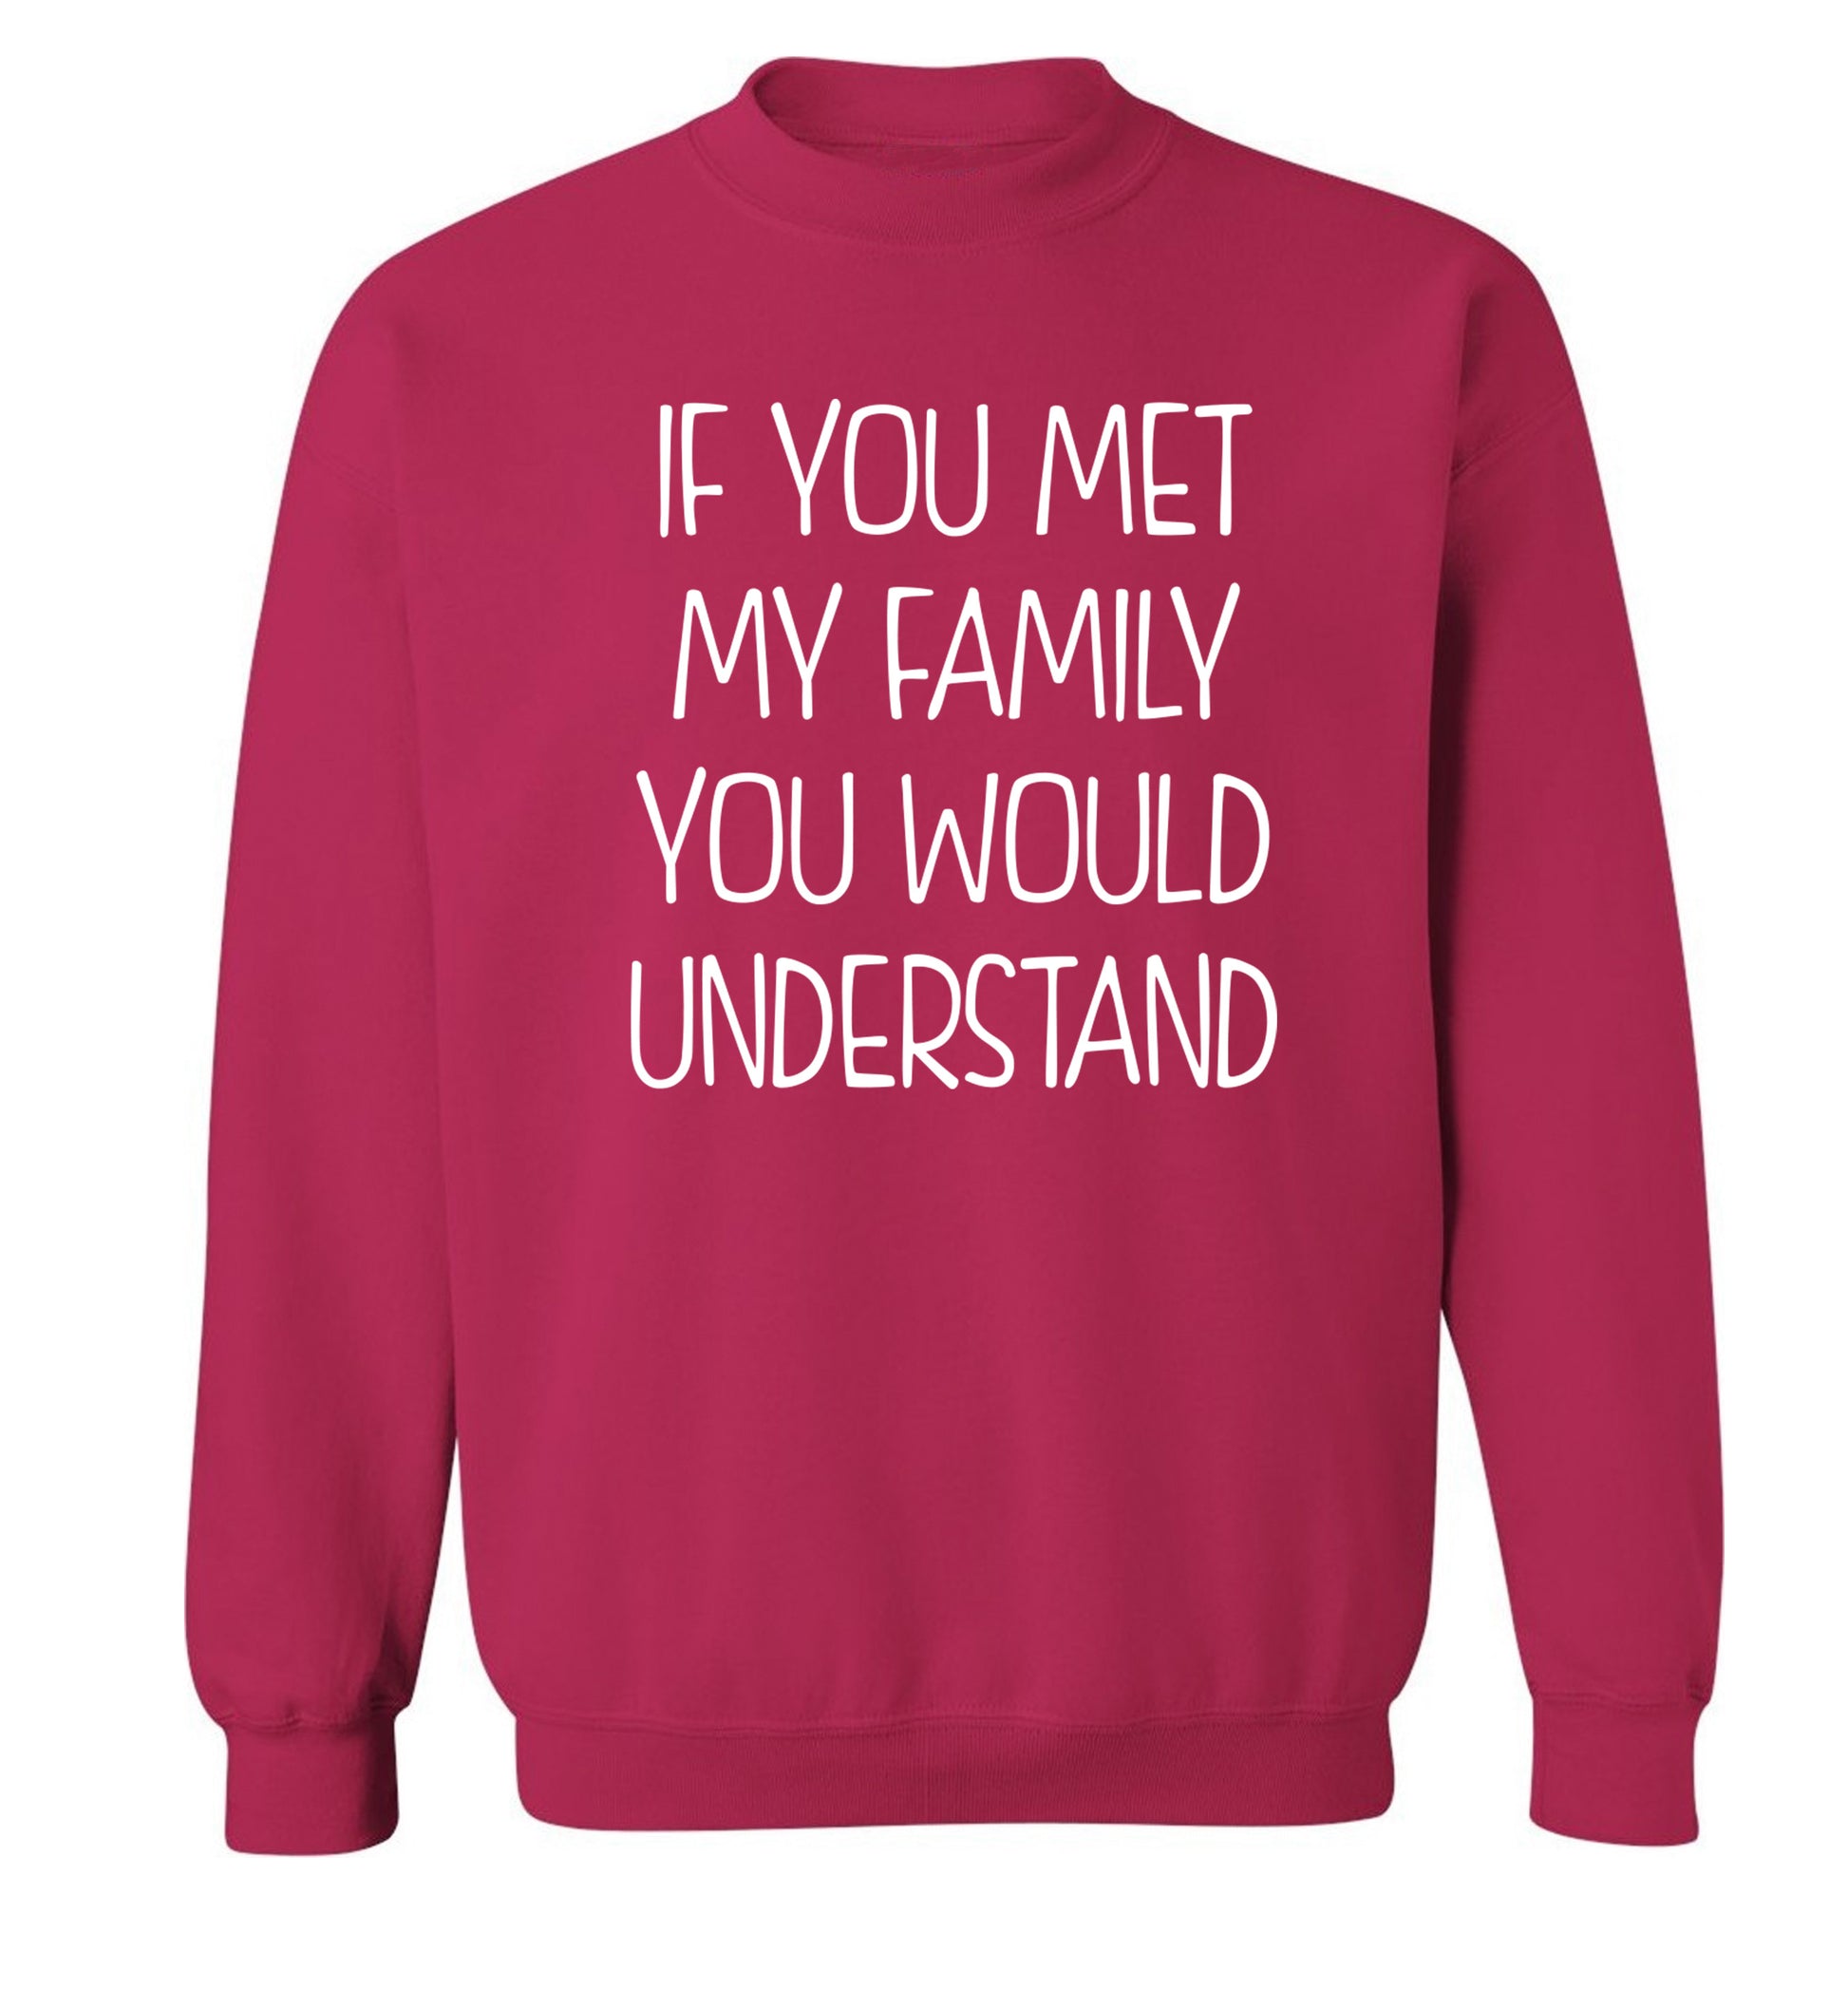 If you met my family you would understand Adult's unisex pink Sweater 2XL